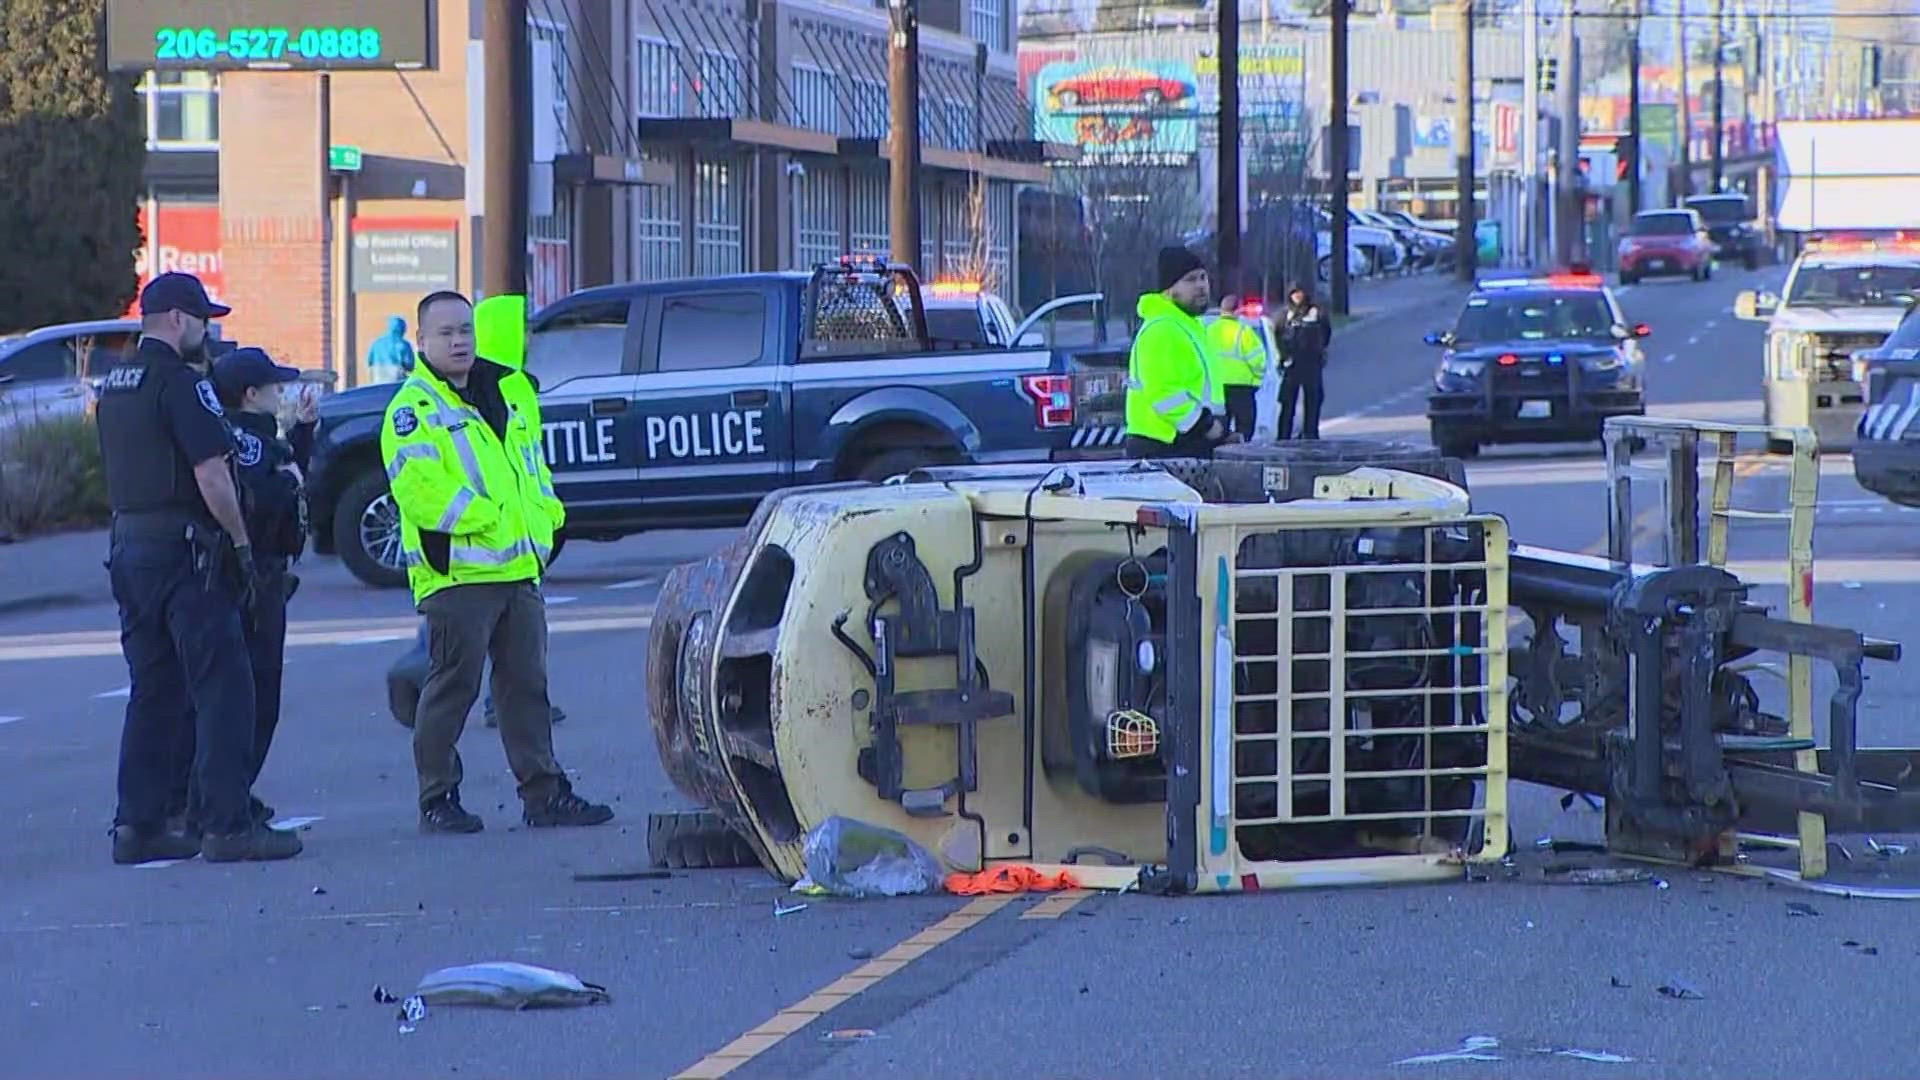 The woman was the passenger in an SUV that was struck by a forklift on Aurora Ave. in Seattle Tuesday. The forklift operator is believed to have been impaired.